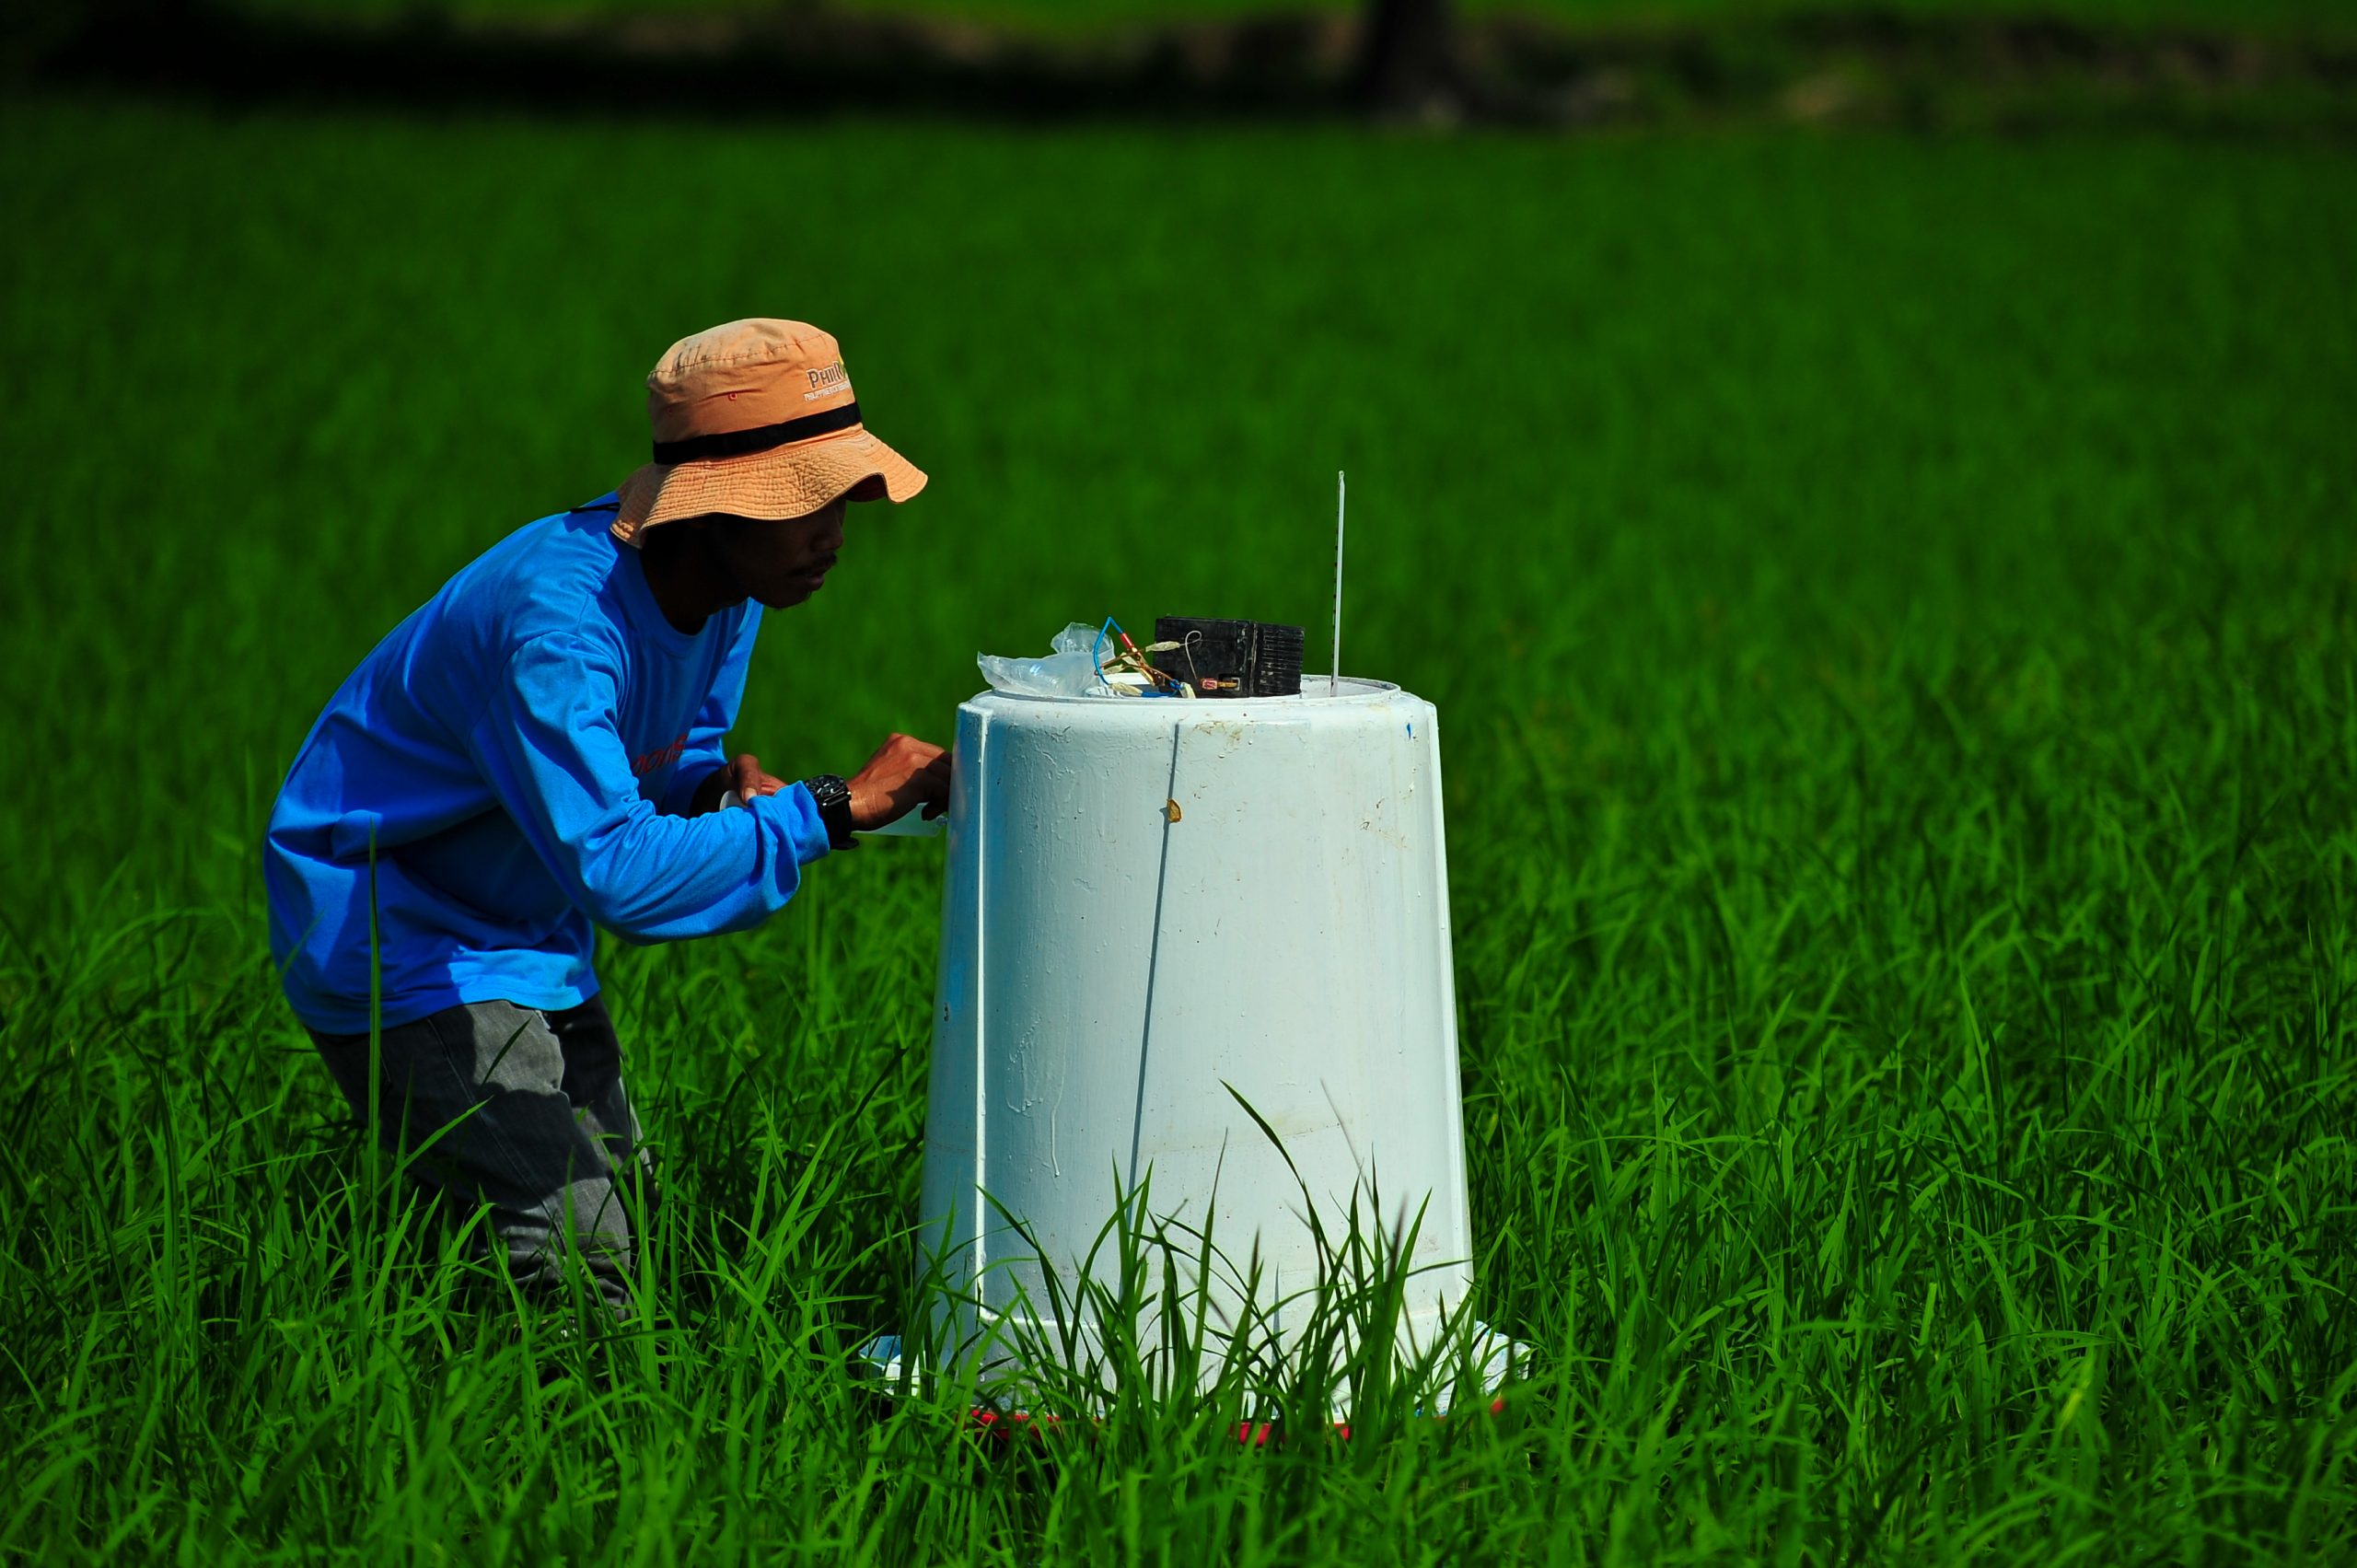 Incentivising low emissions rice production through satellite technology in Vietnam